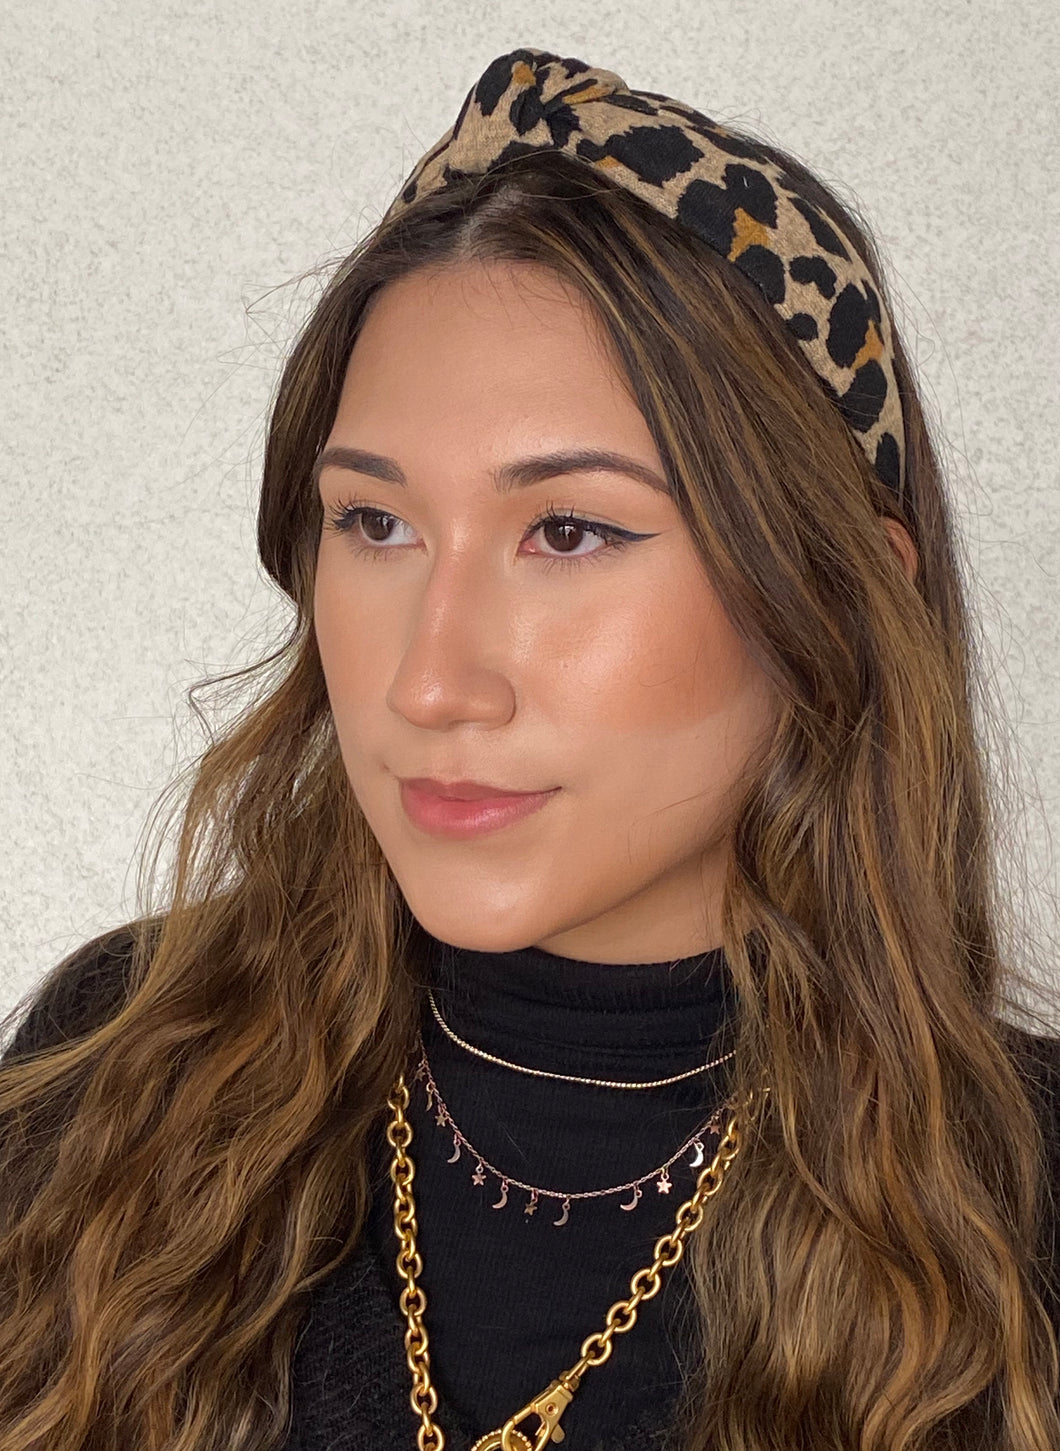 The Kate Leopard Jersey Knotted Headband